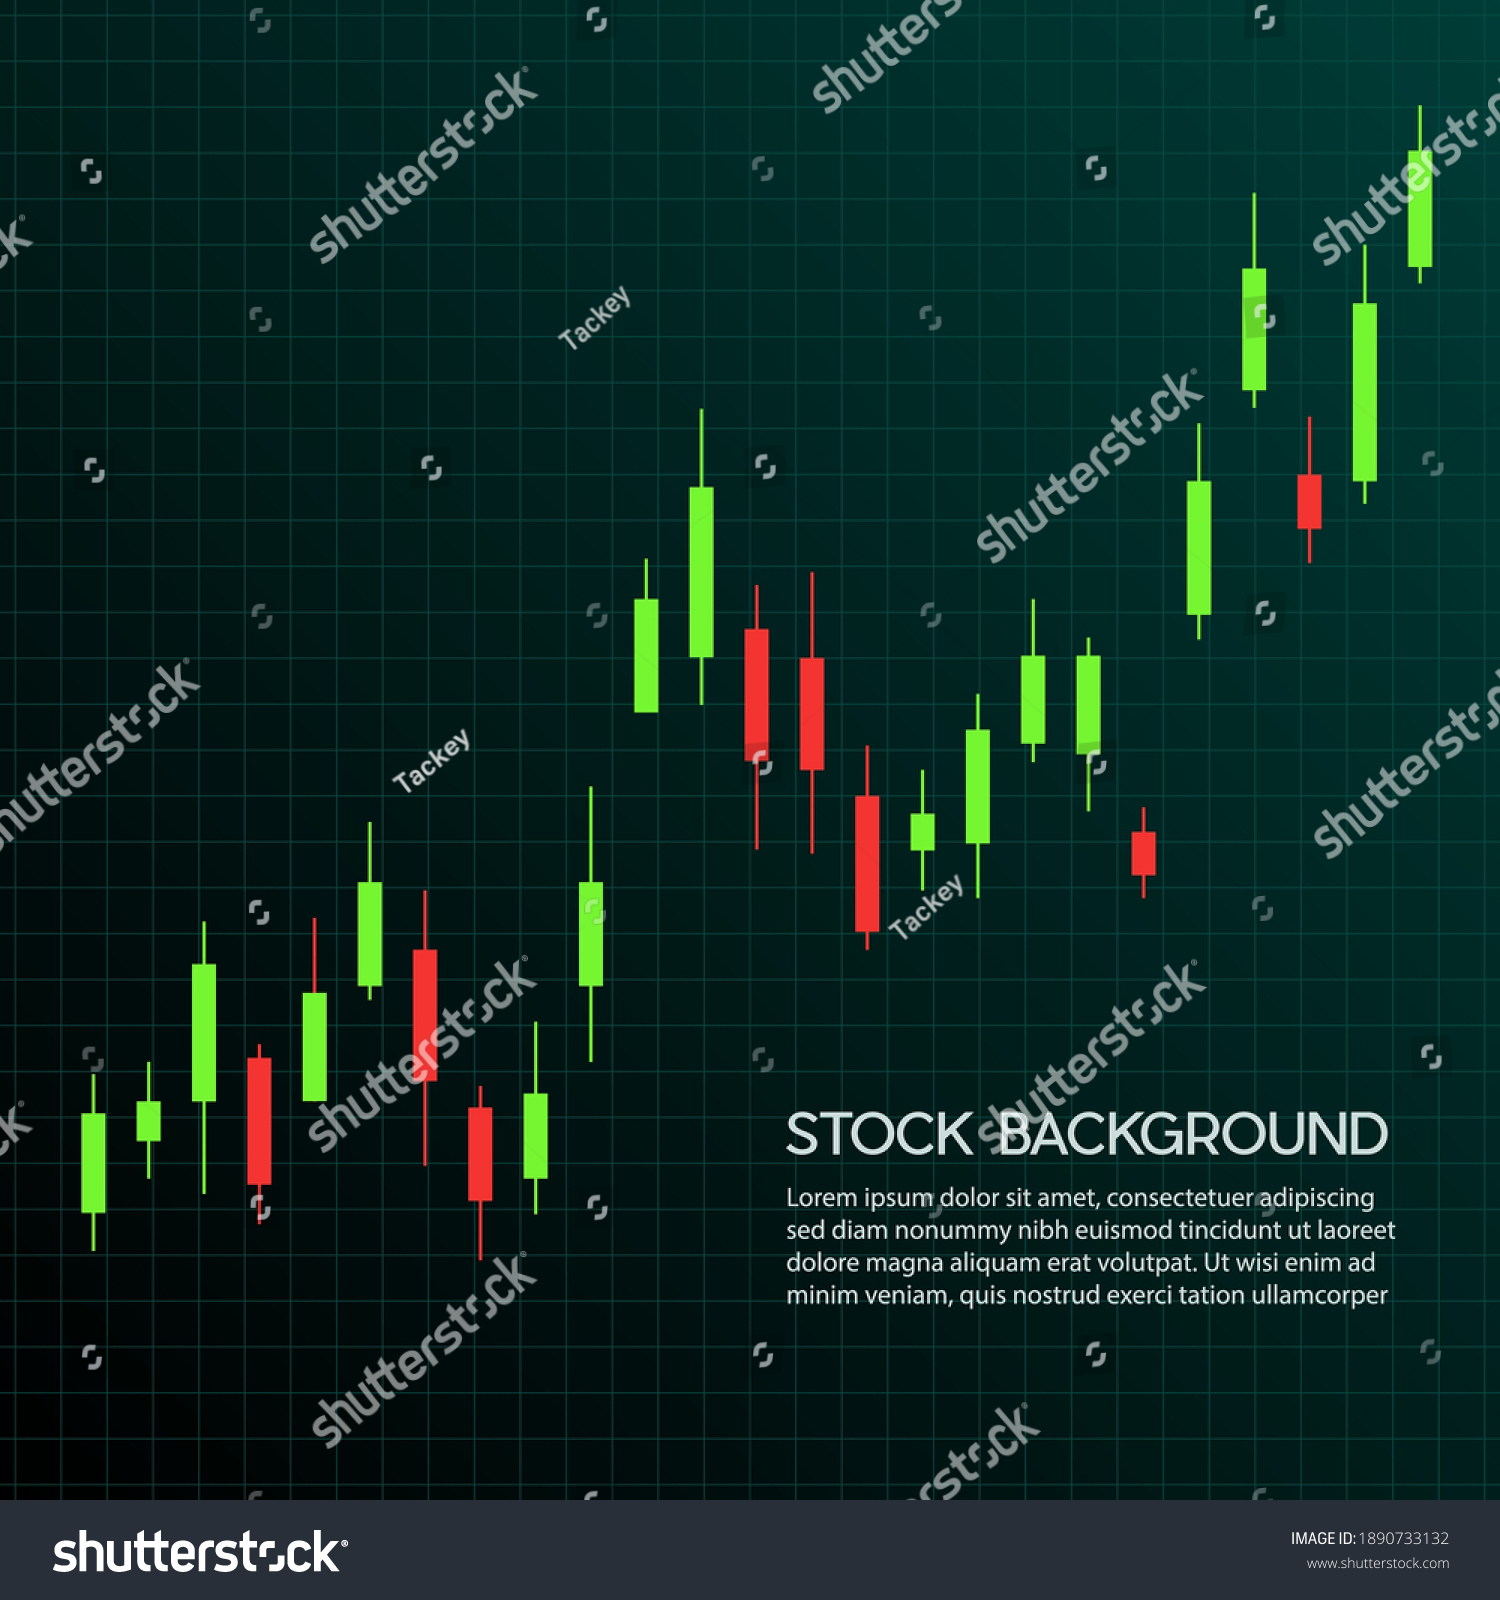 SVG of Candlestick patterns background. Stock trends or Candlesticks are created by up and down movements in the price and show in the 2D minimal graphic background. svg